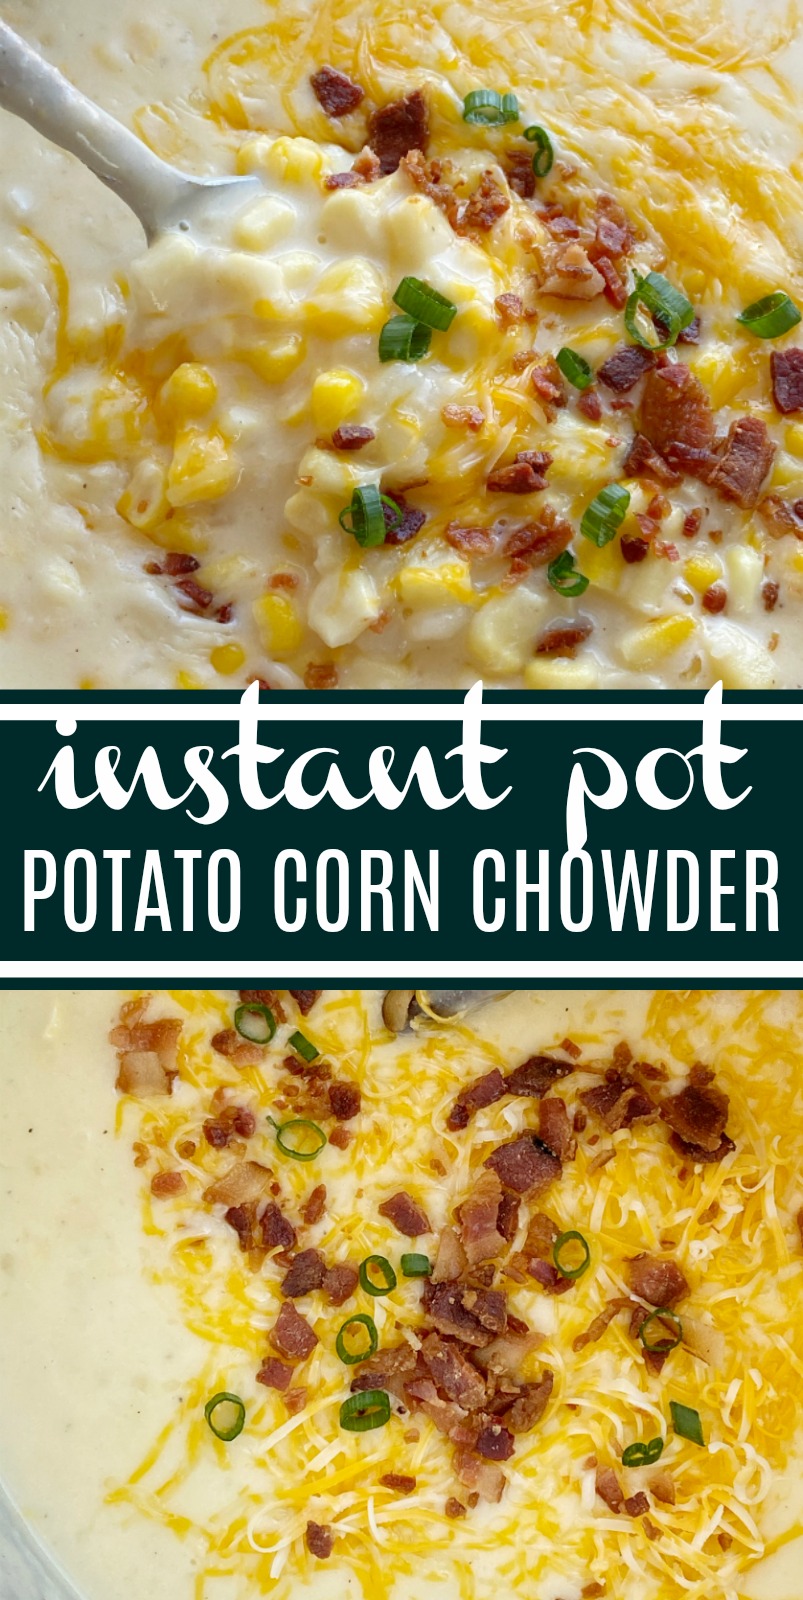 Instant Pot Soup Recipe | Instant Pot Recipes | Potato Corn Chowder made in the Instant Pot! Frozen corn, chopped potatoes, and cheese in a creamy chicken broth base. Serve with shredded cheese, bacon, and green onions. #instantpotrecipes #instantpot #pressurecooker #dinnerrecipes #chowder #cornchowder